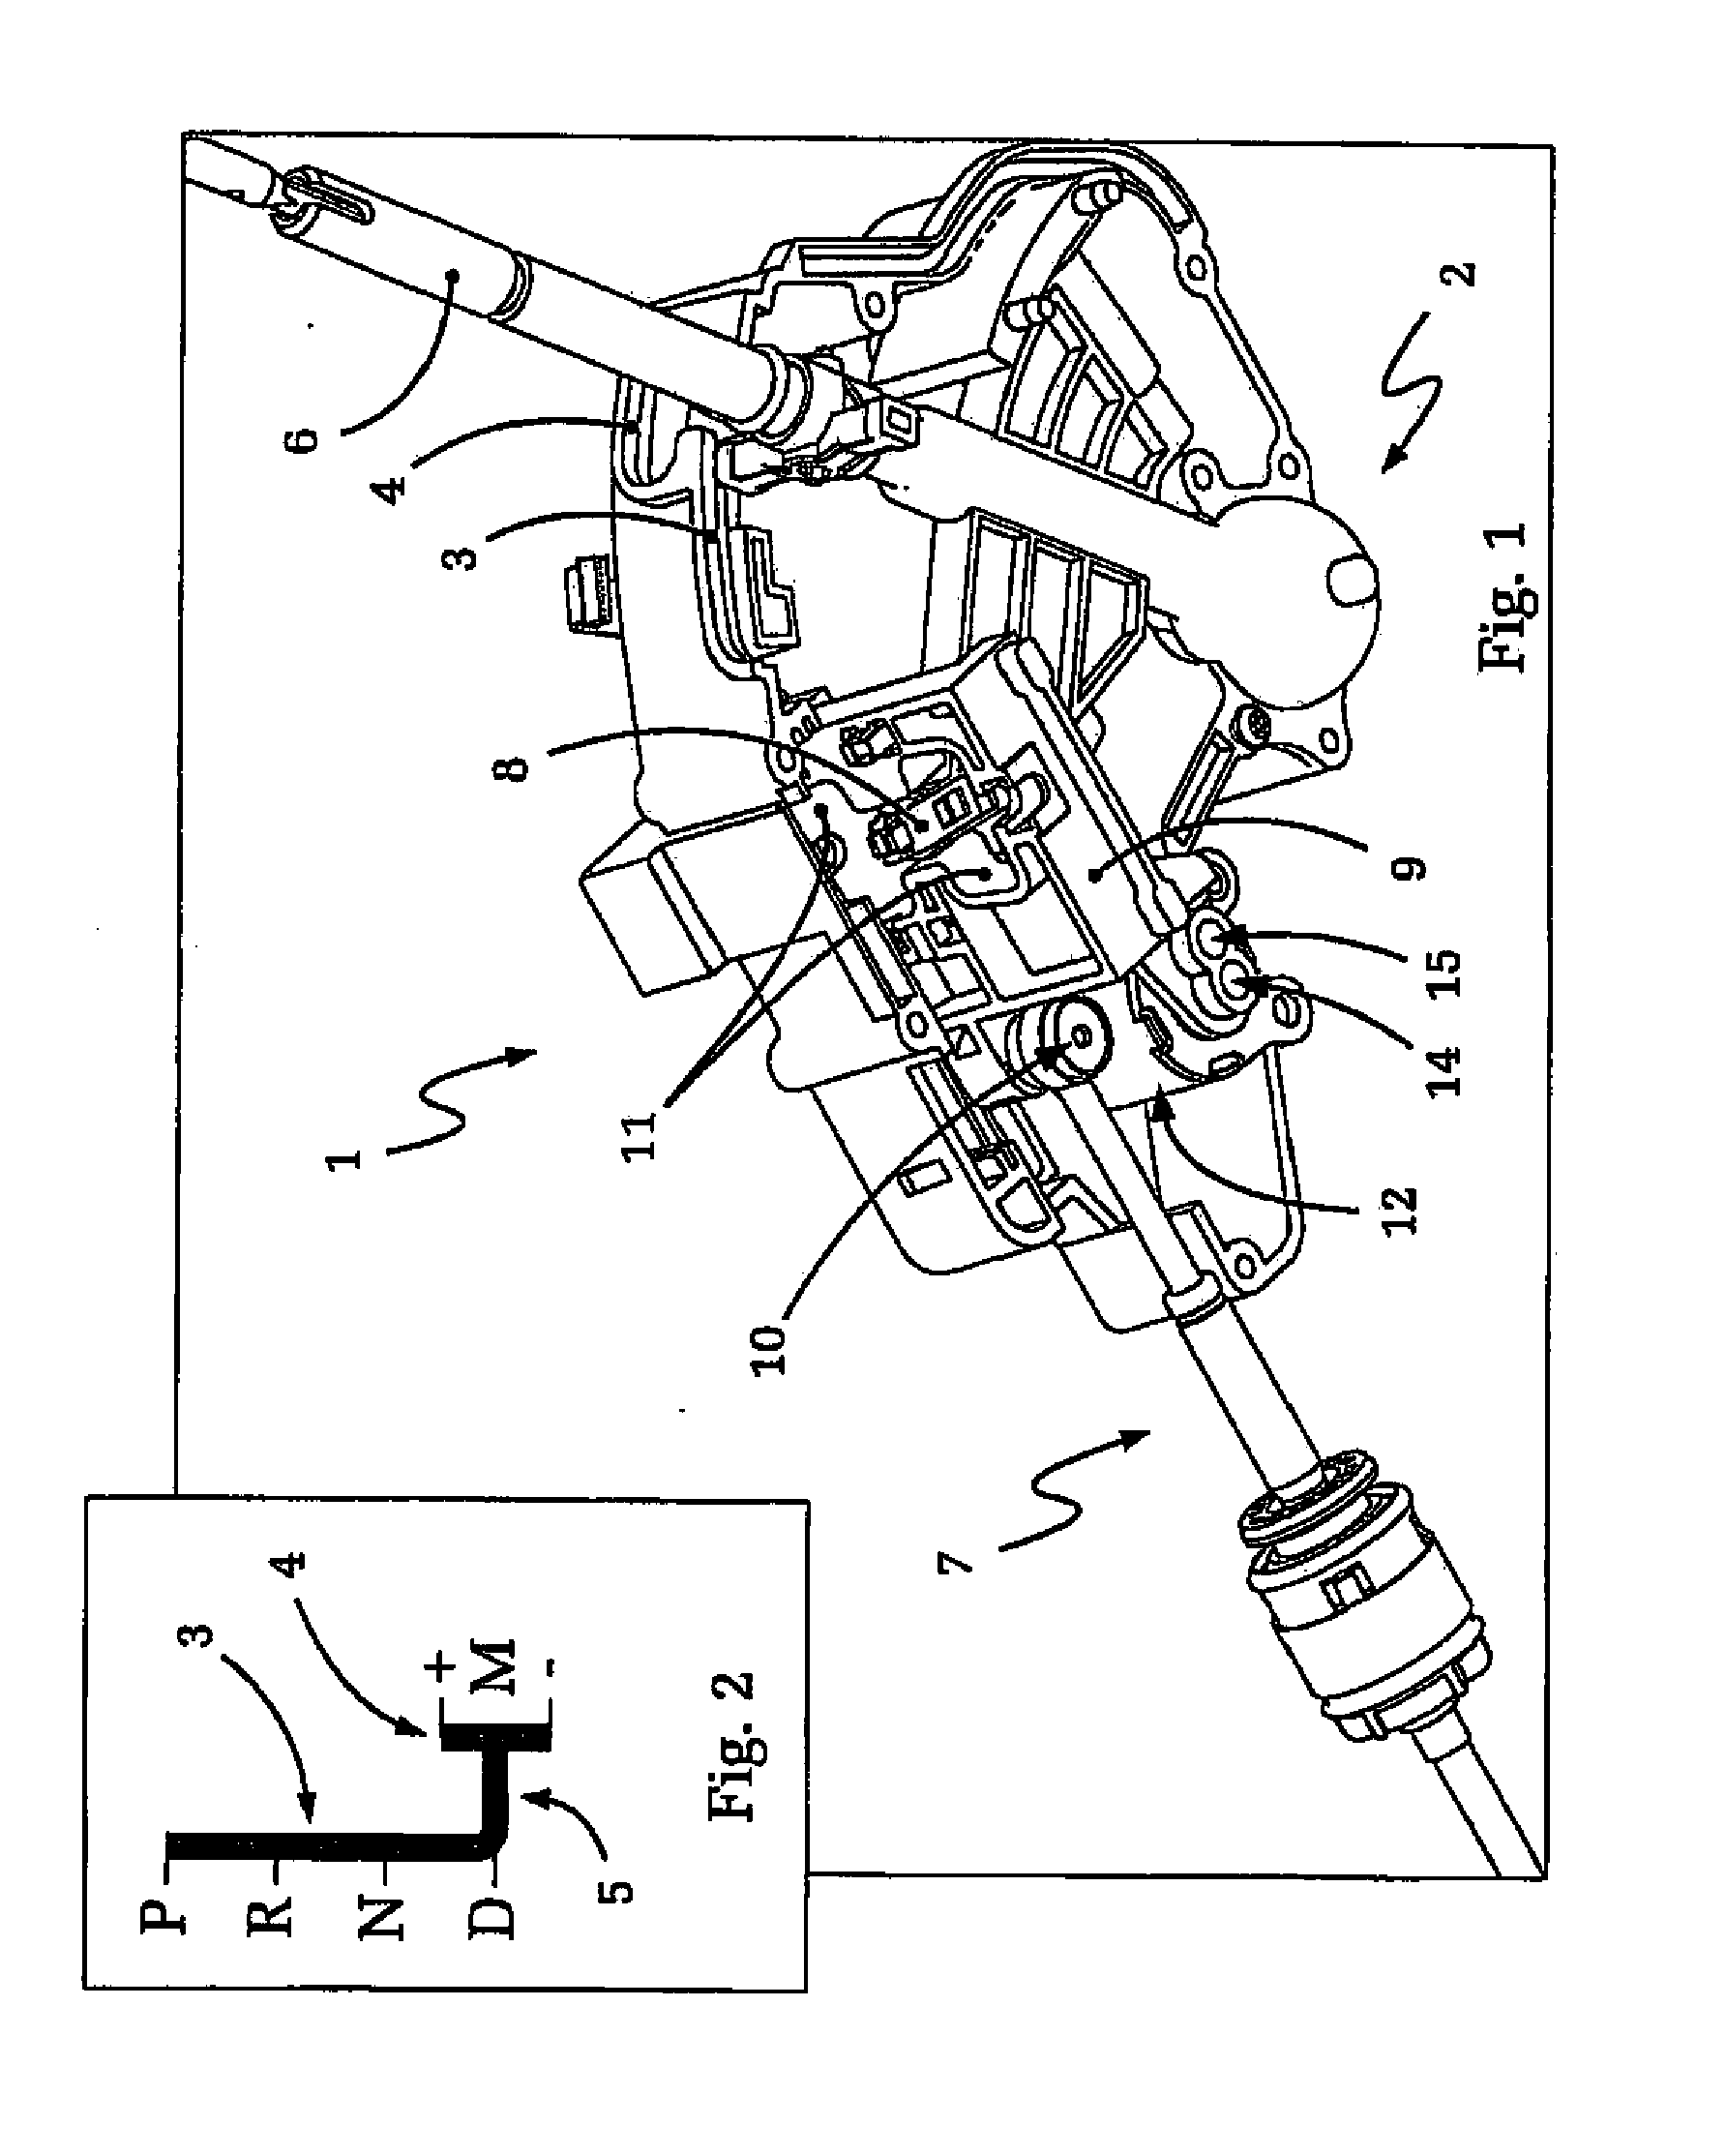 Actuating device with shift carrage lock